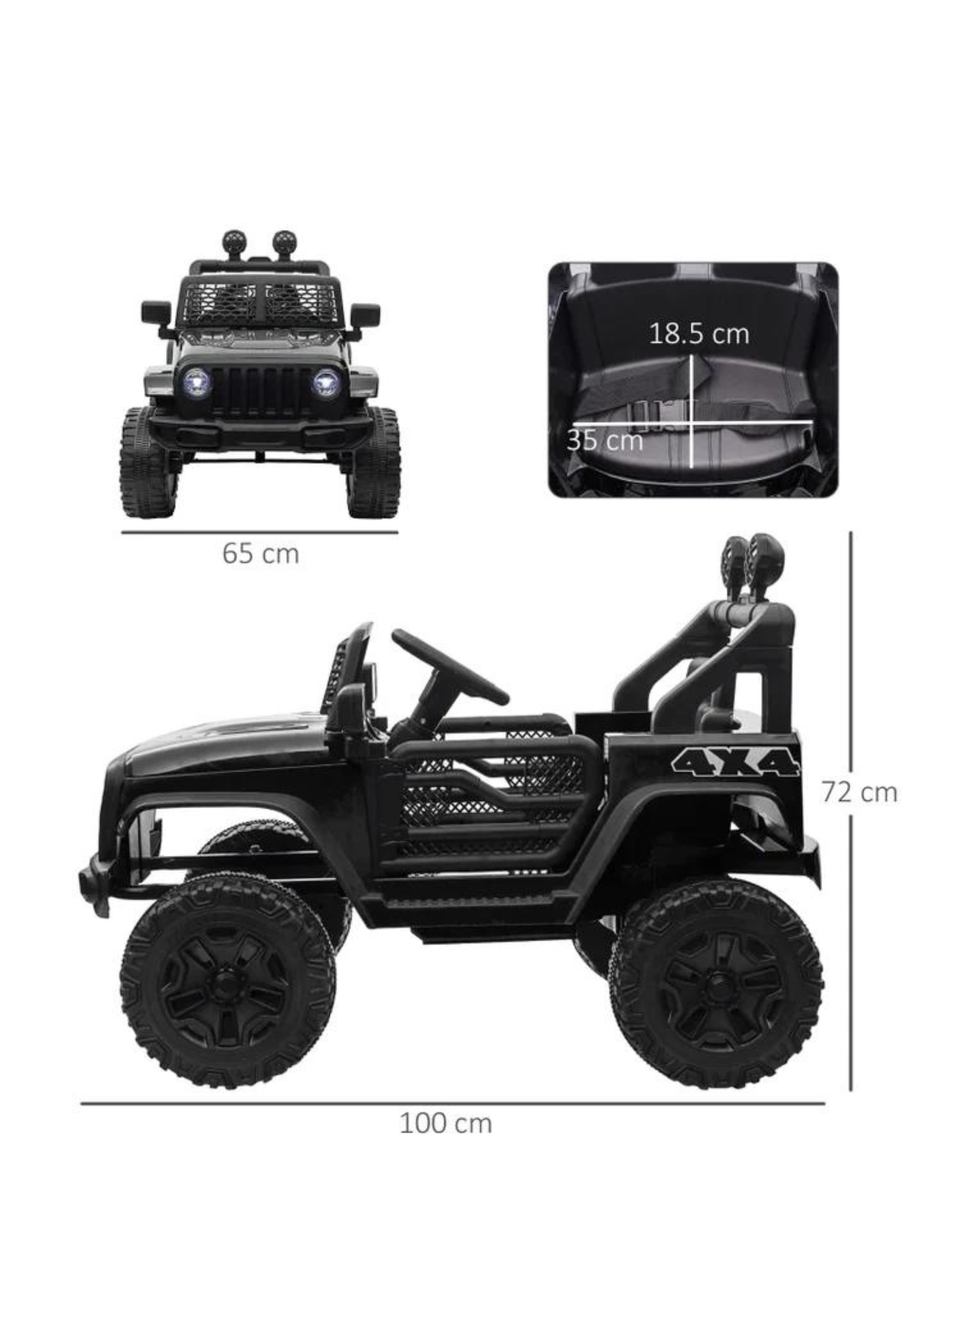 HOMCOM 12V Kids Electric Ride On Car Truck Off-road Toy with Remote Control (Black)